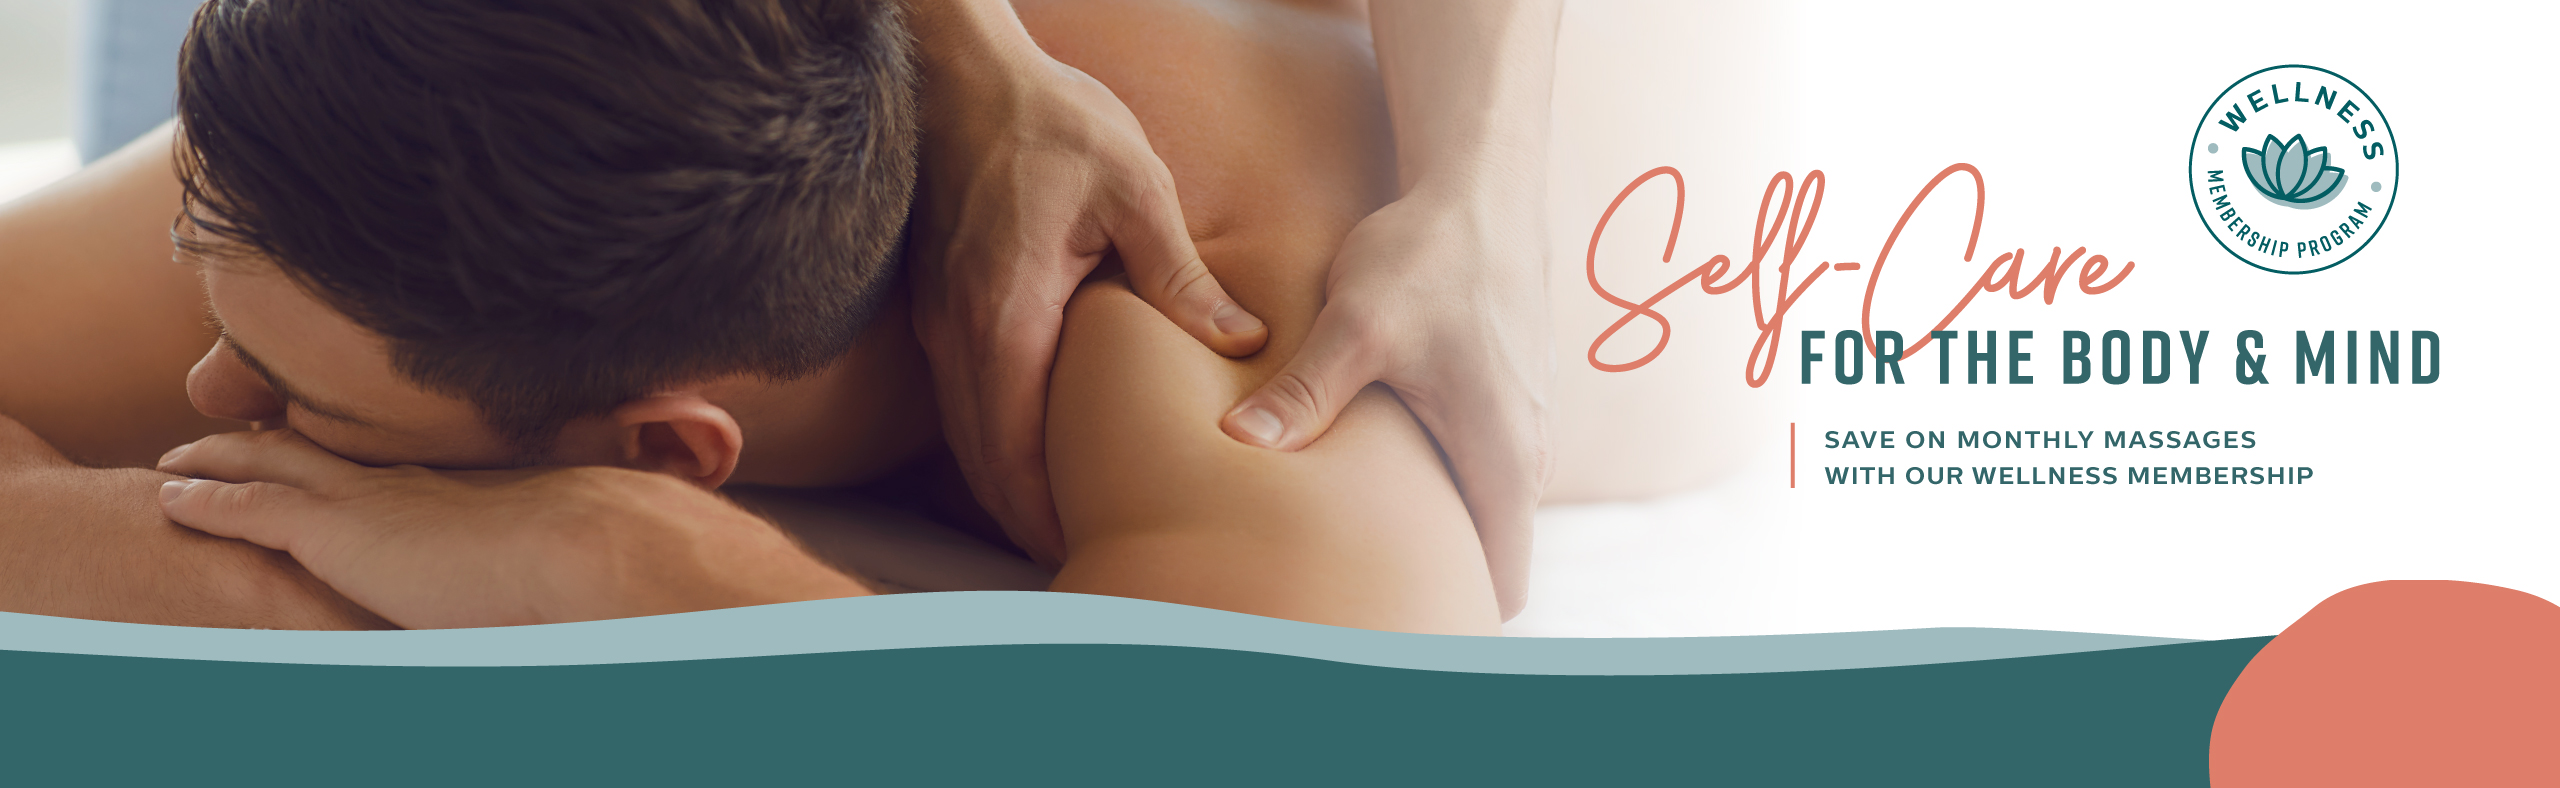 Enjoy the benefits of monthly massages with a membership